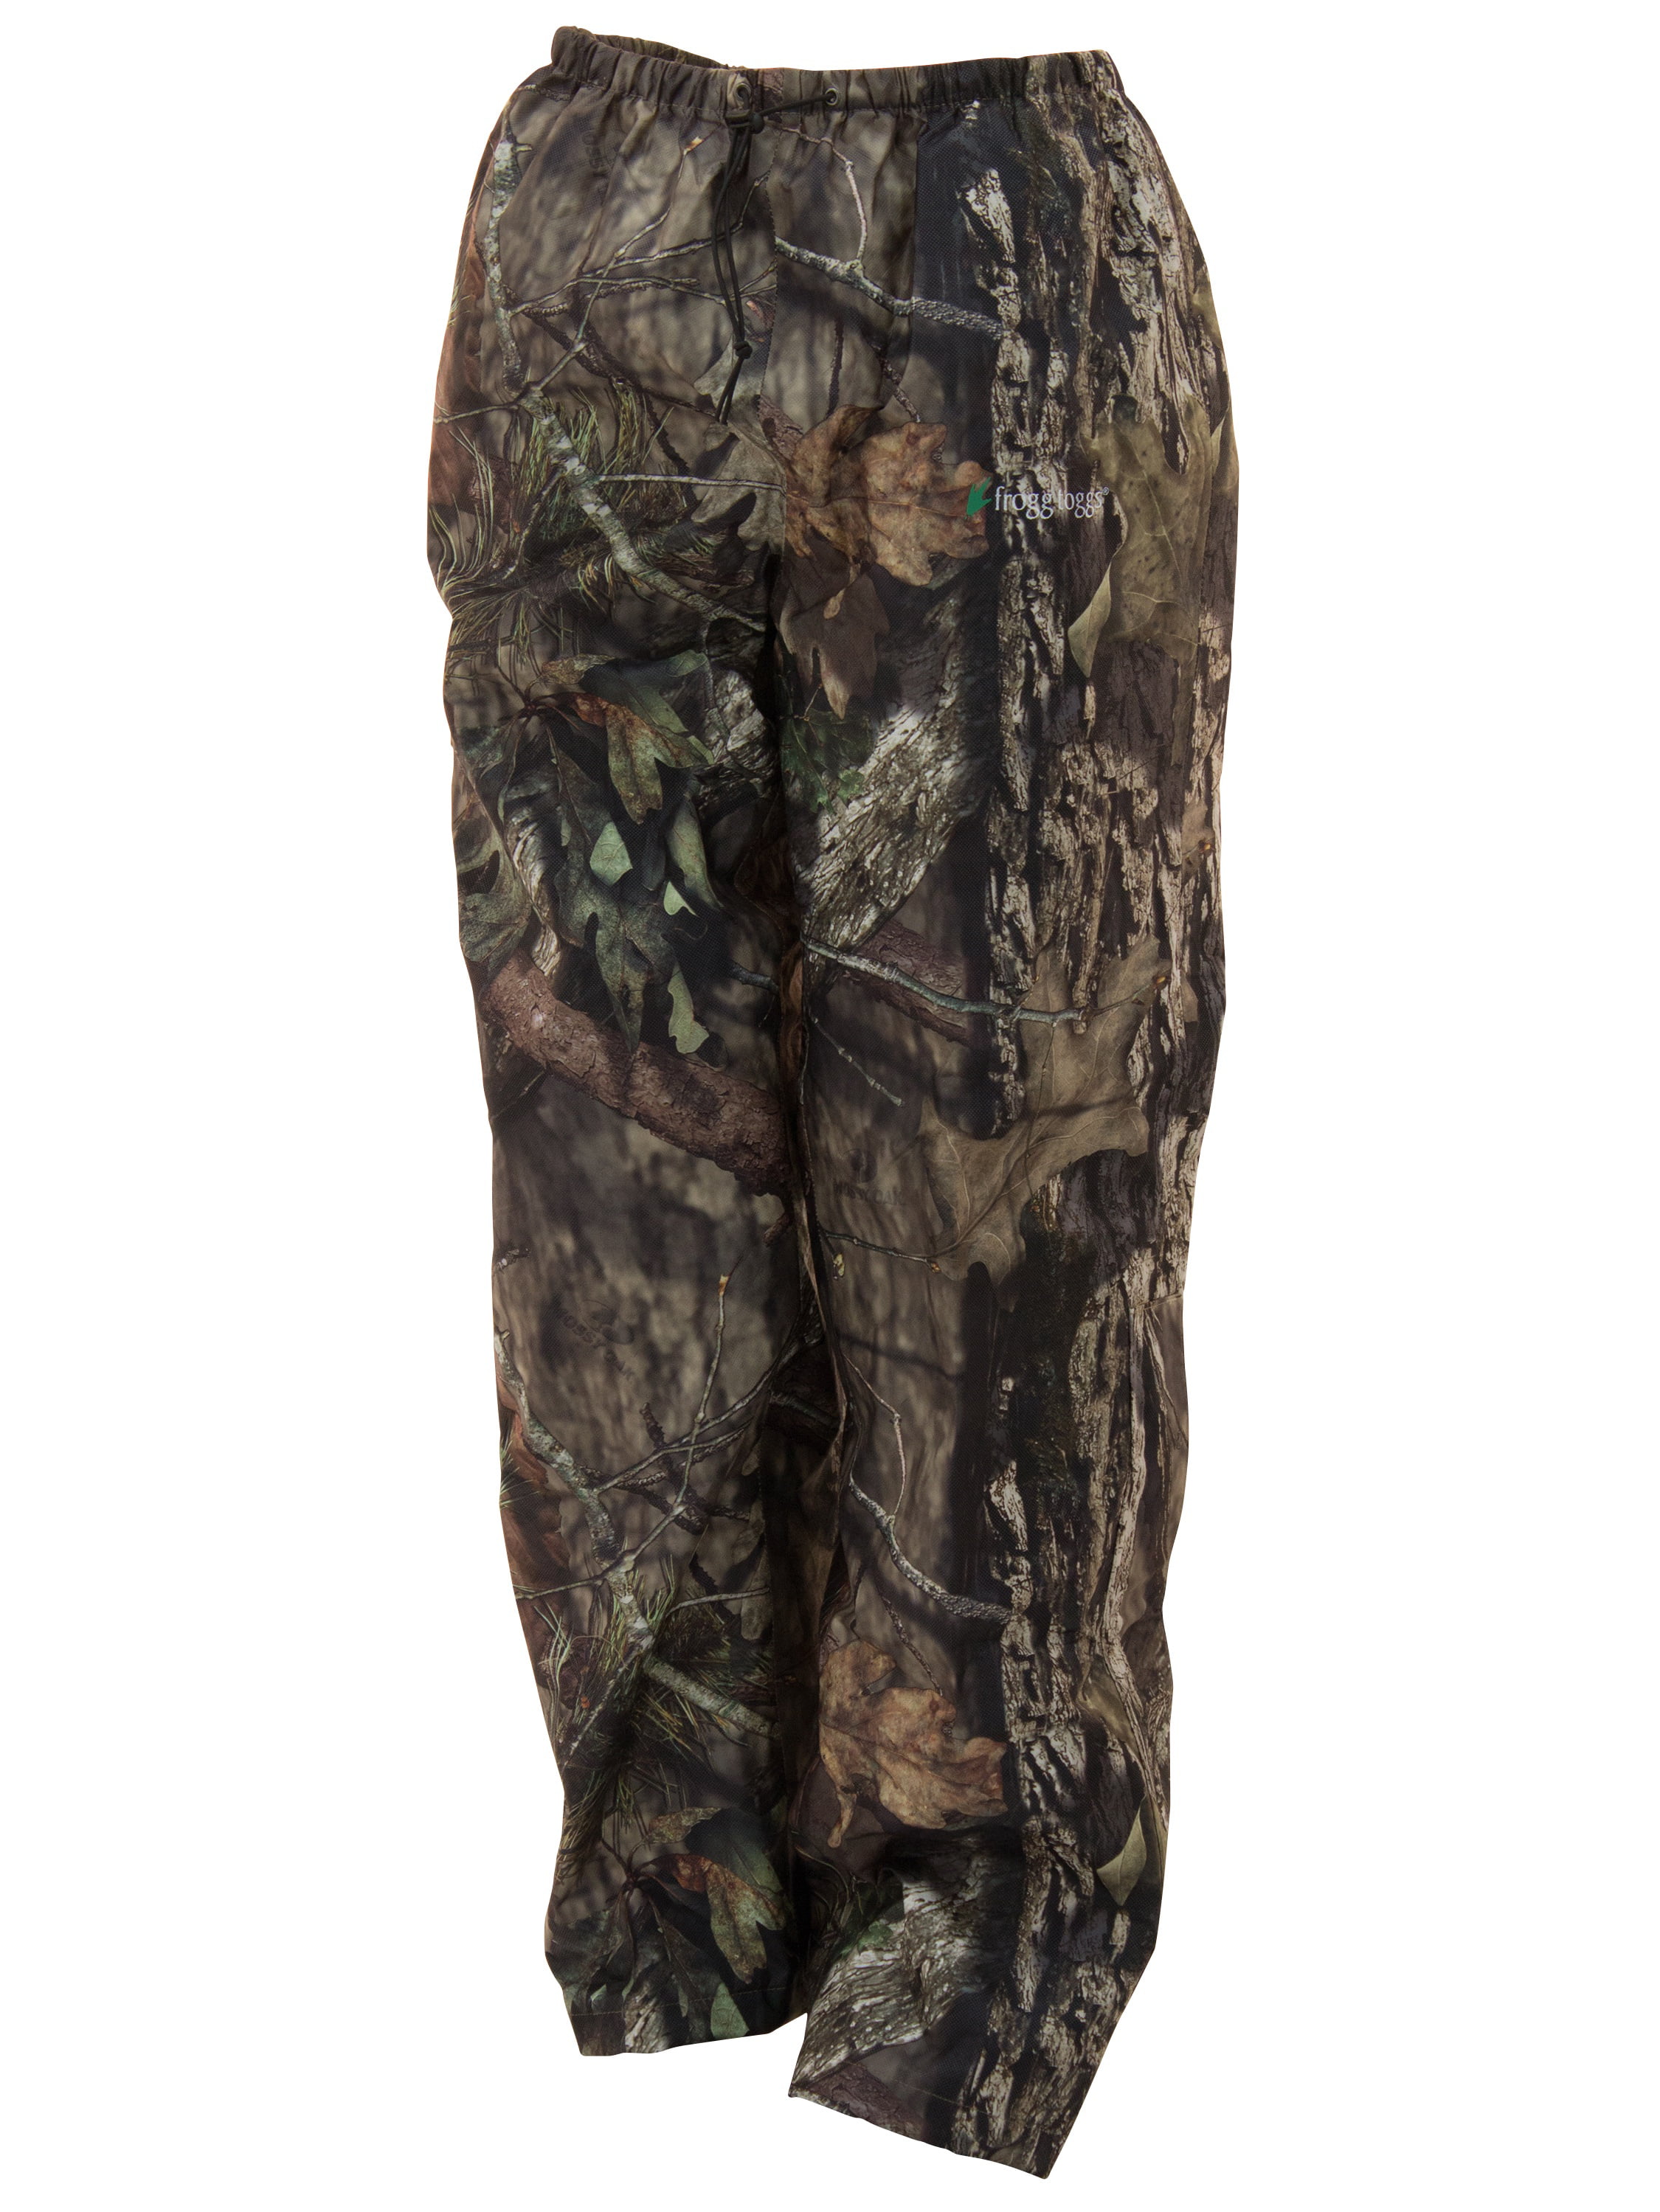 Sporting Goods M MOSSY OAK BREAK-UP COUNTRY CAMO MENS CARGO HUNTING